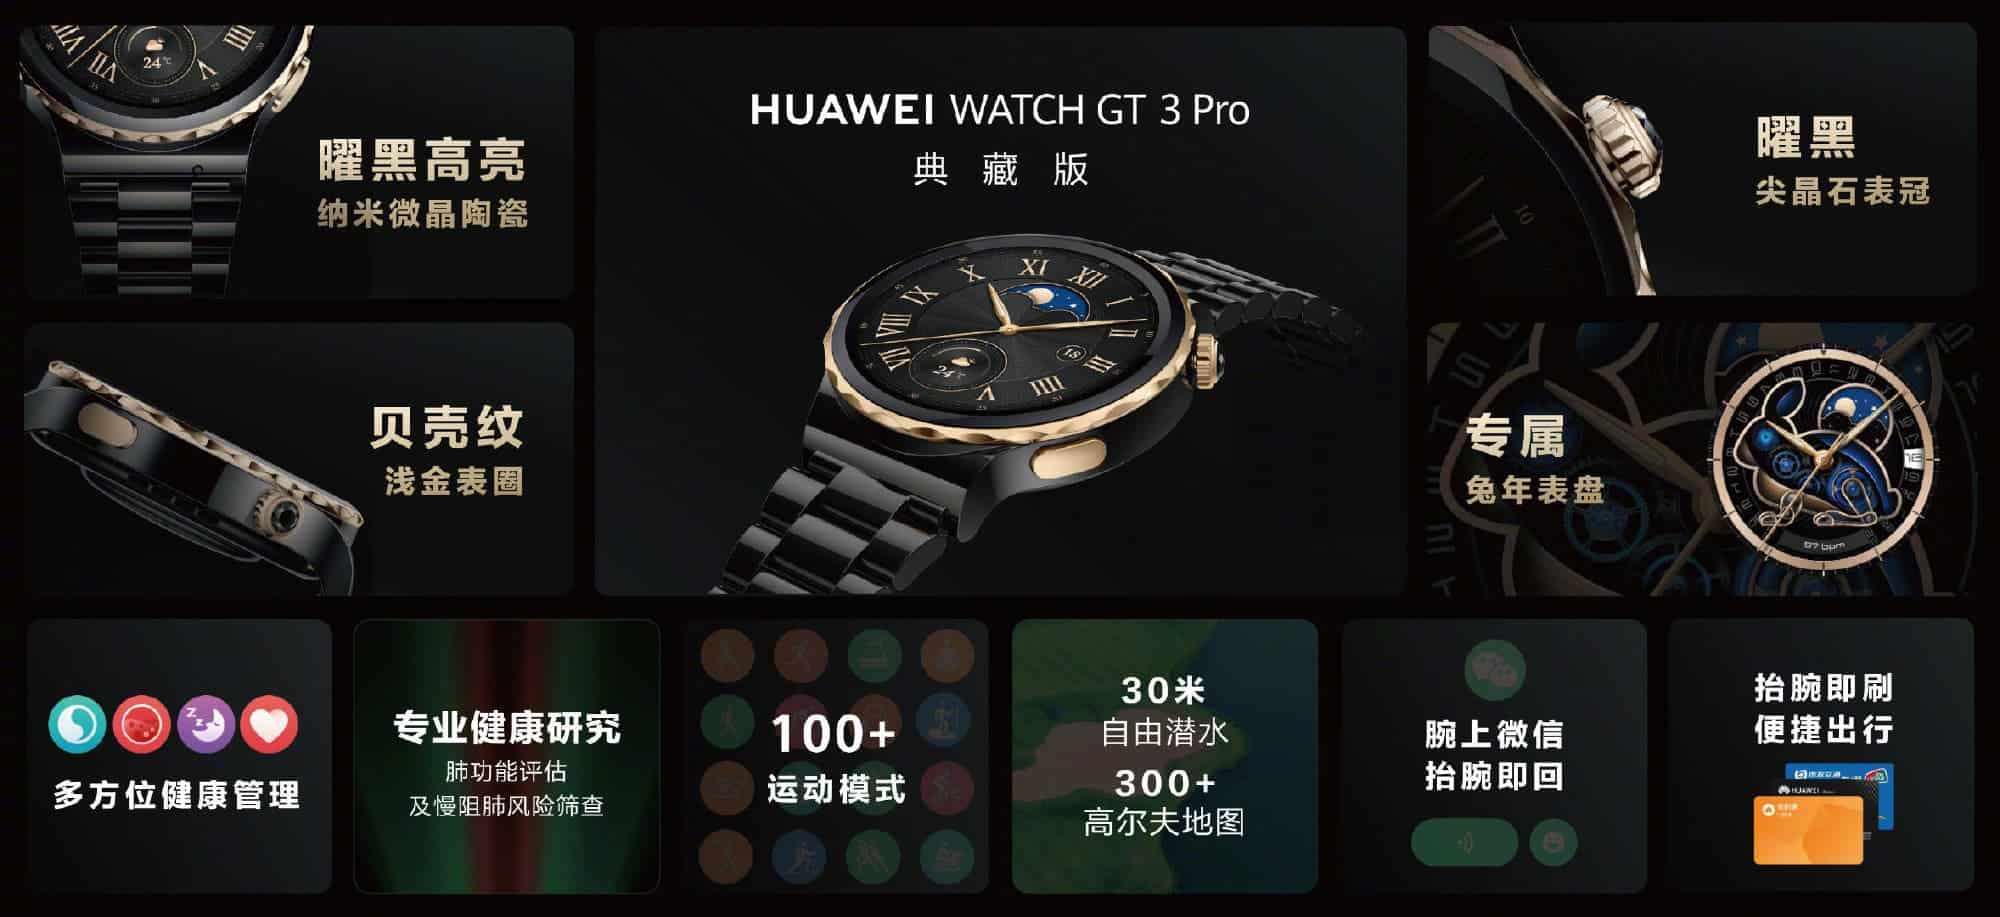 Huawei Watch GT 3 Pro collection edition